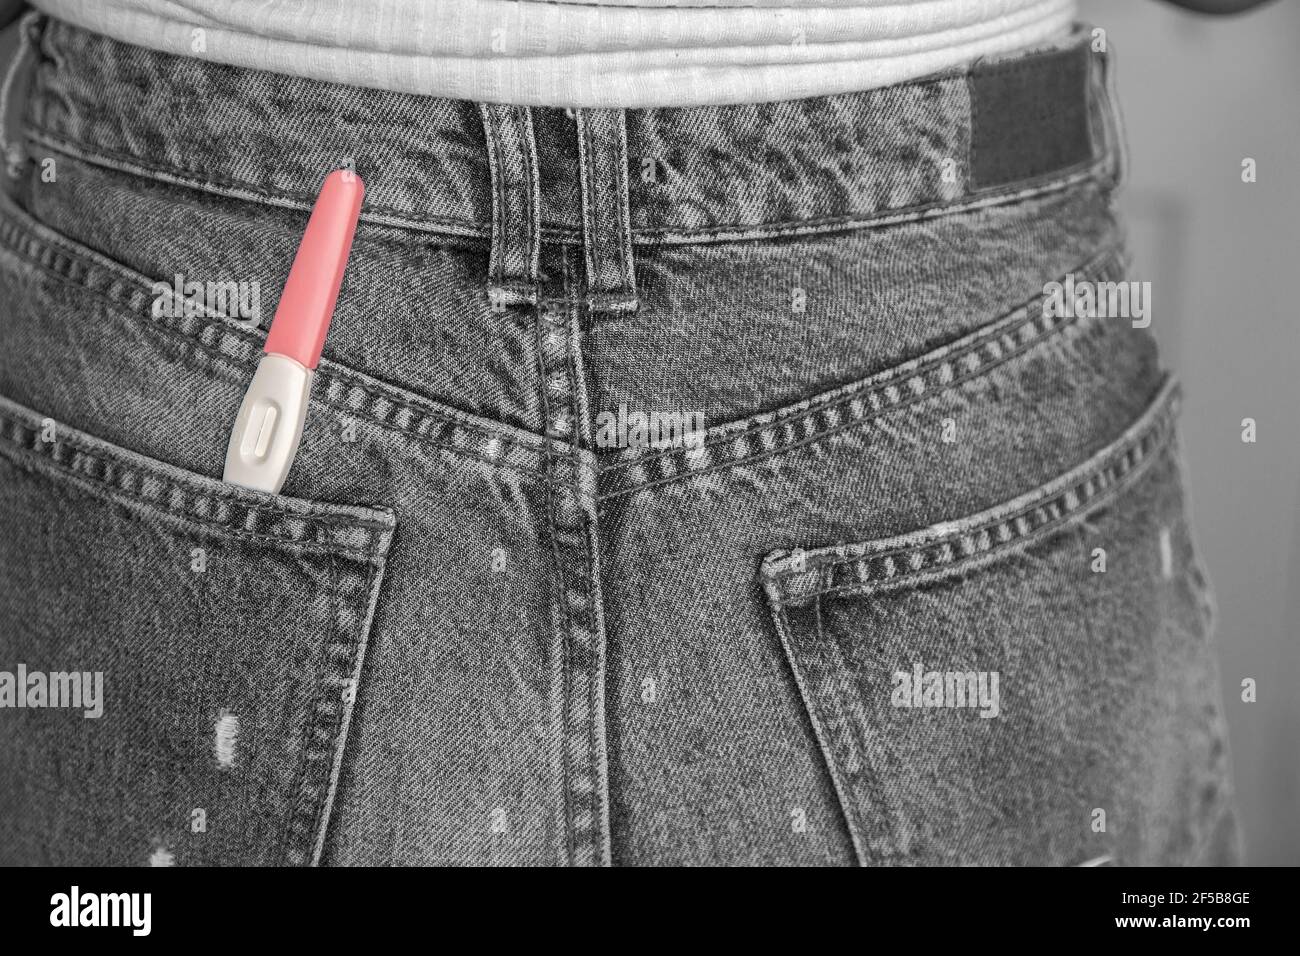 Young woman with positive pregnancy test in pocket of jeans close-up black and white Stock Photo